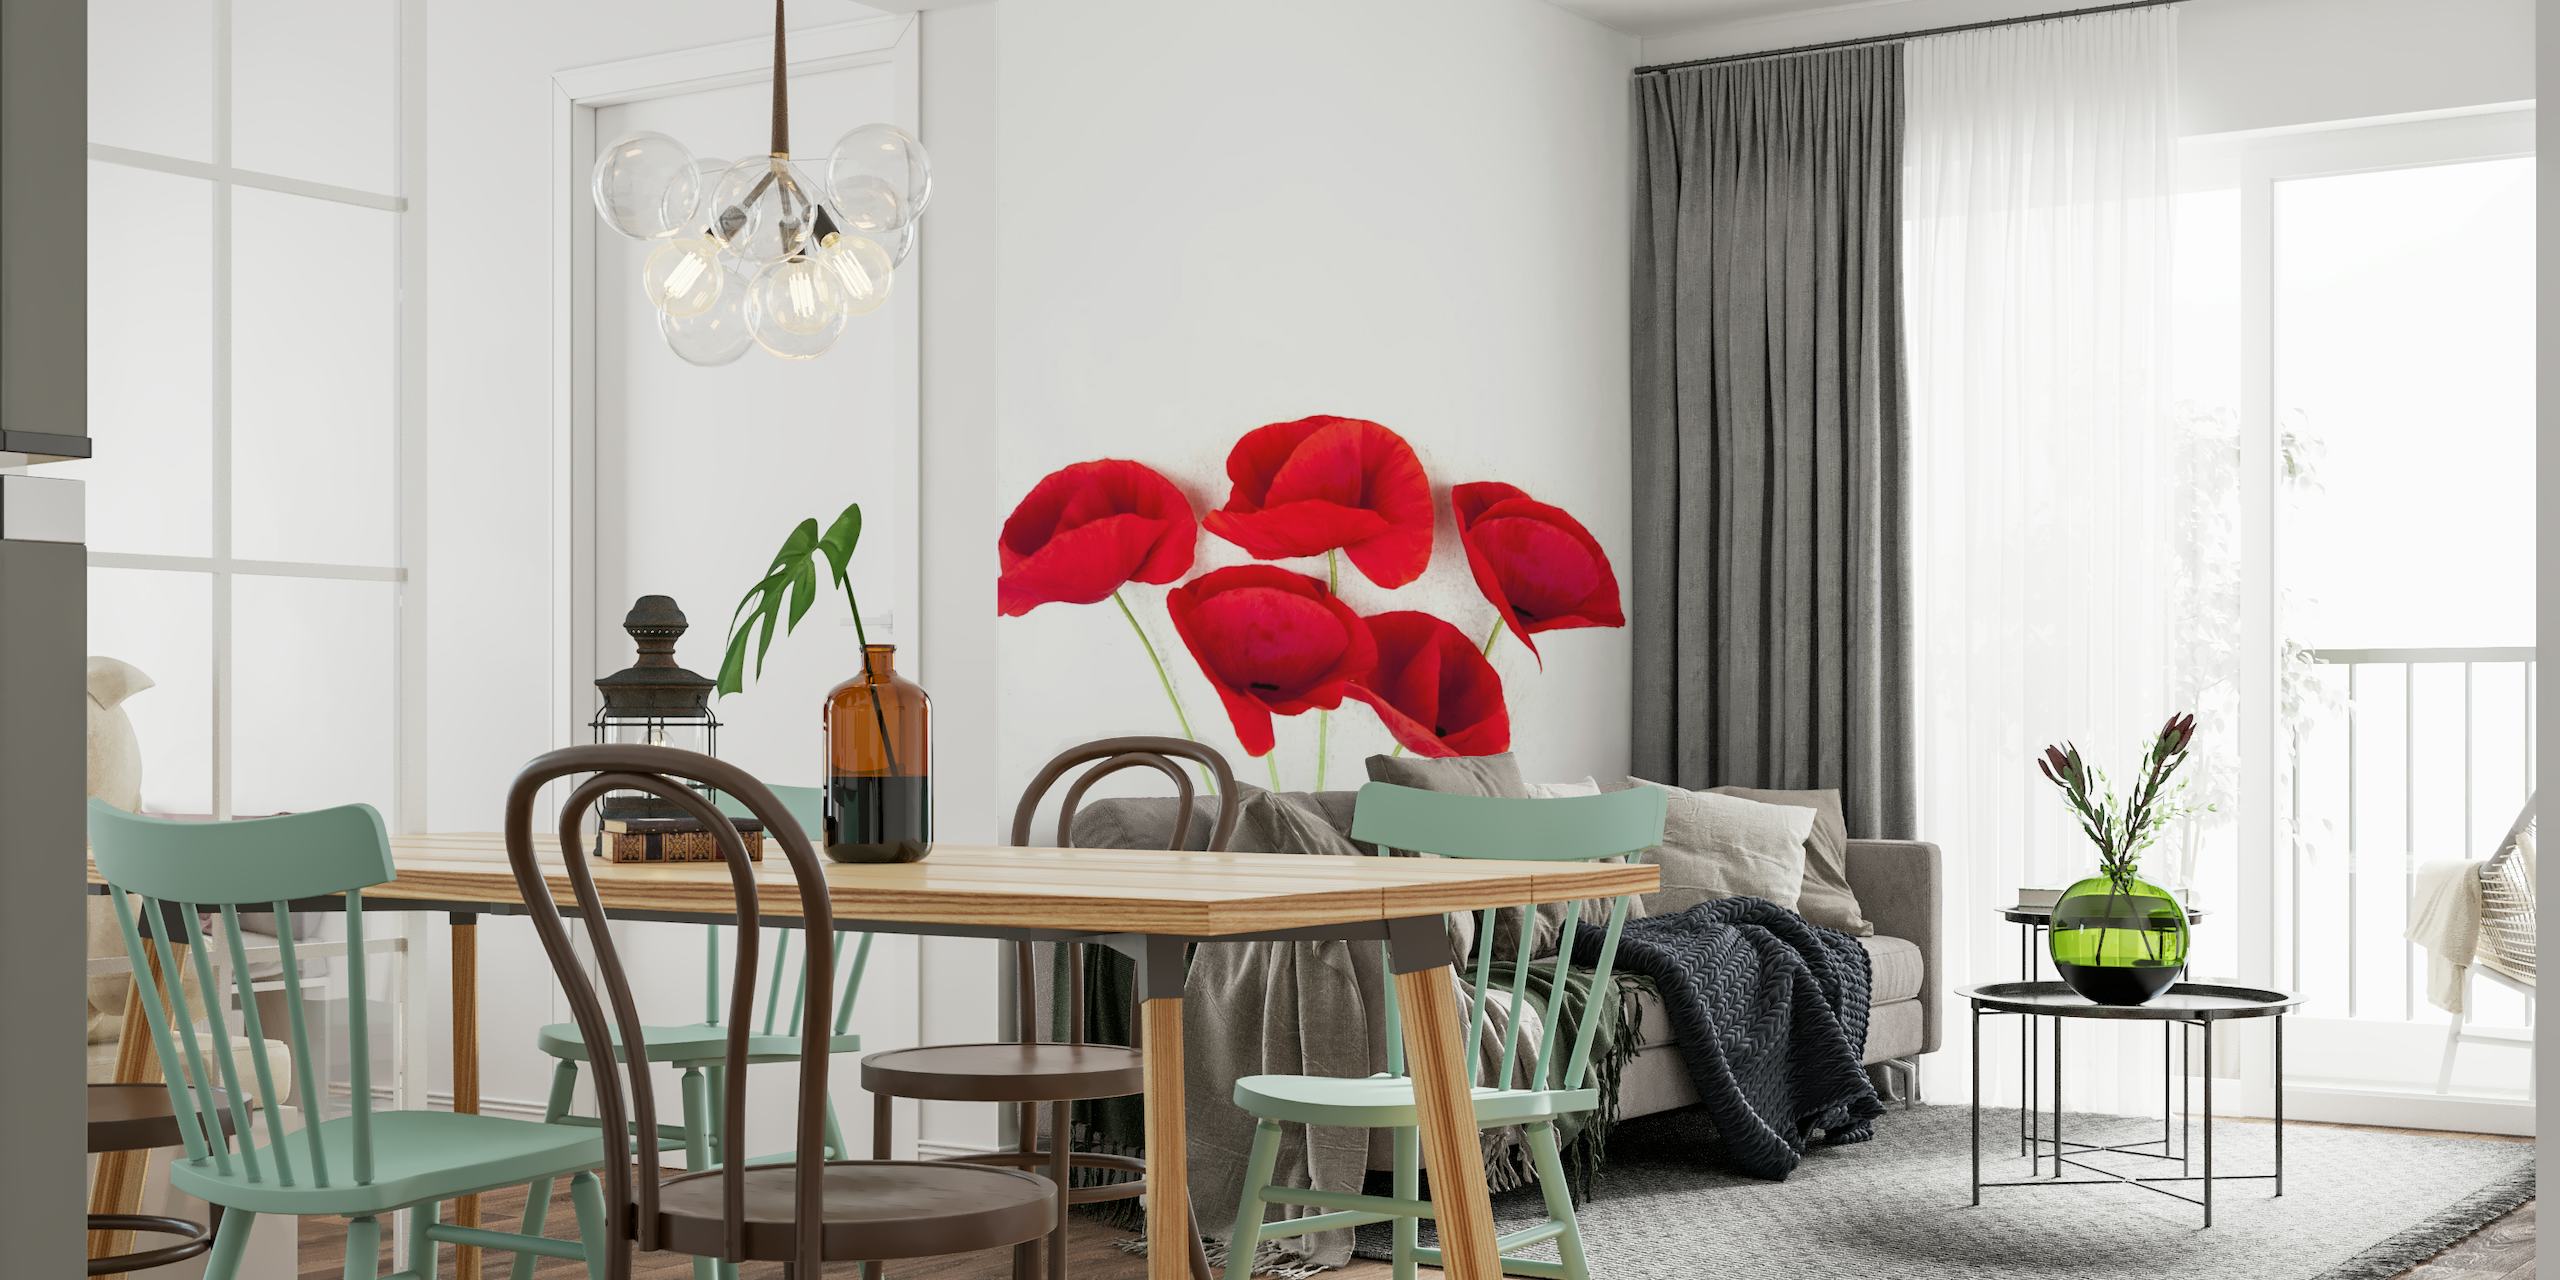 five red poppies with a white background wall mural